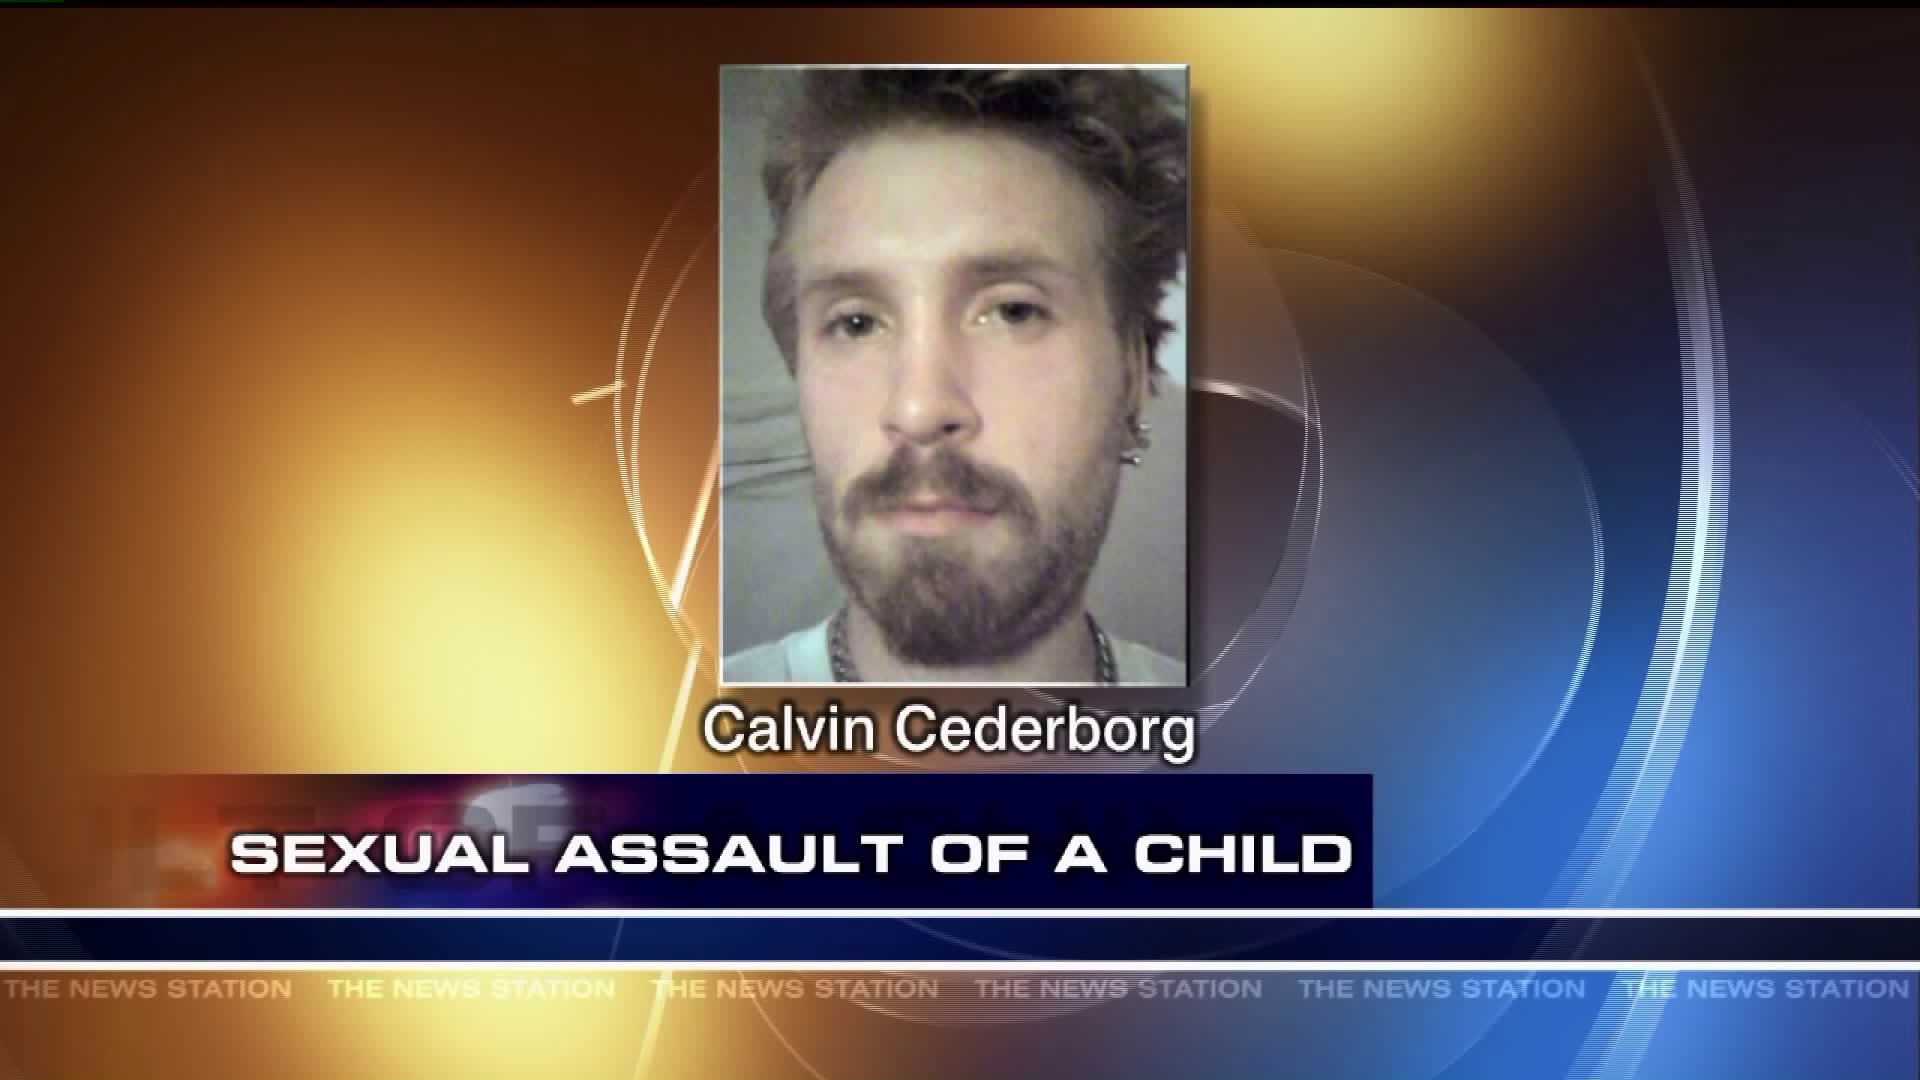 Man Locked Up Accused of Sexually Assaulting Minor